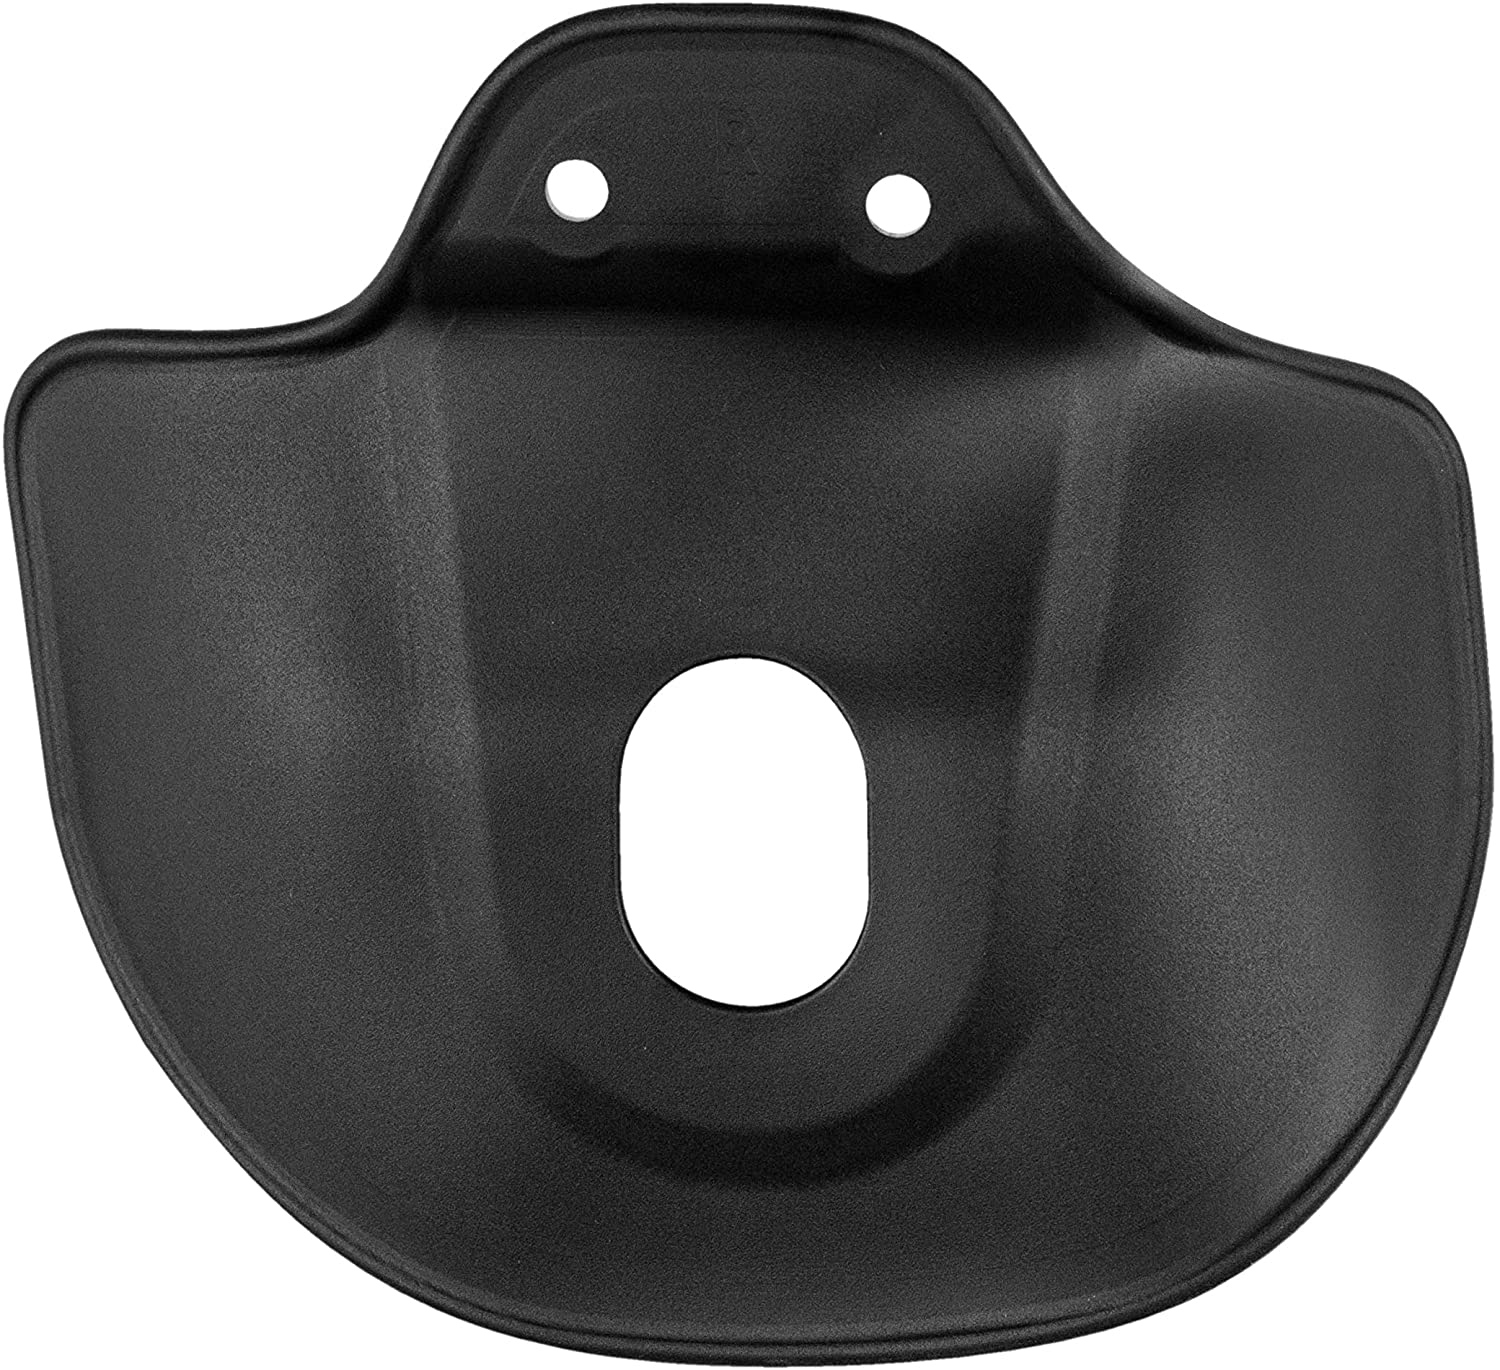 Safariland 568BL INJECTION MOLDED PADDLE FOR SAFARILAND® 3-HOLE PATTERN HOLSTERS